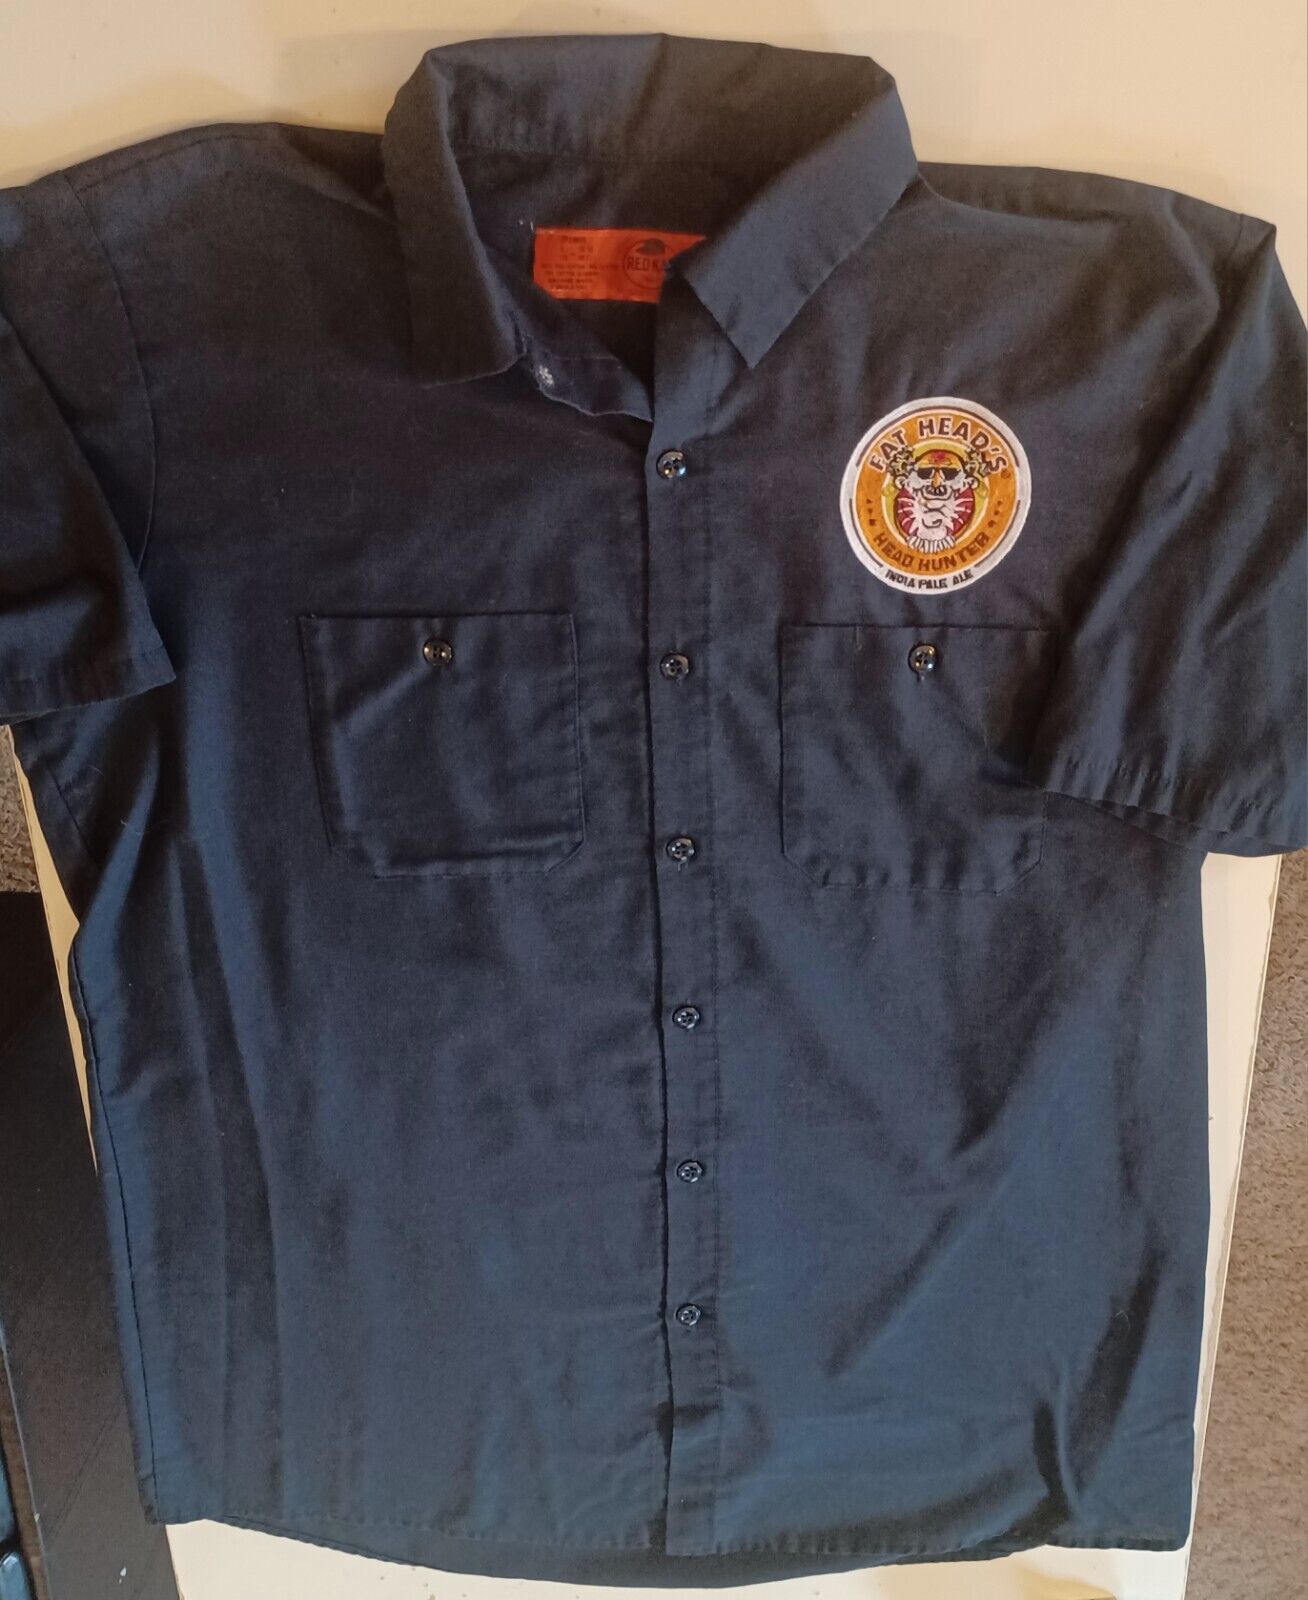 Fat Head's Brewery Head Hunter Beer Research Technician Large Button Shirt